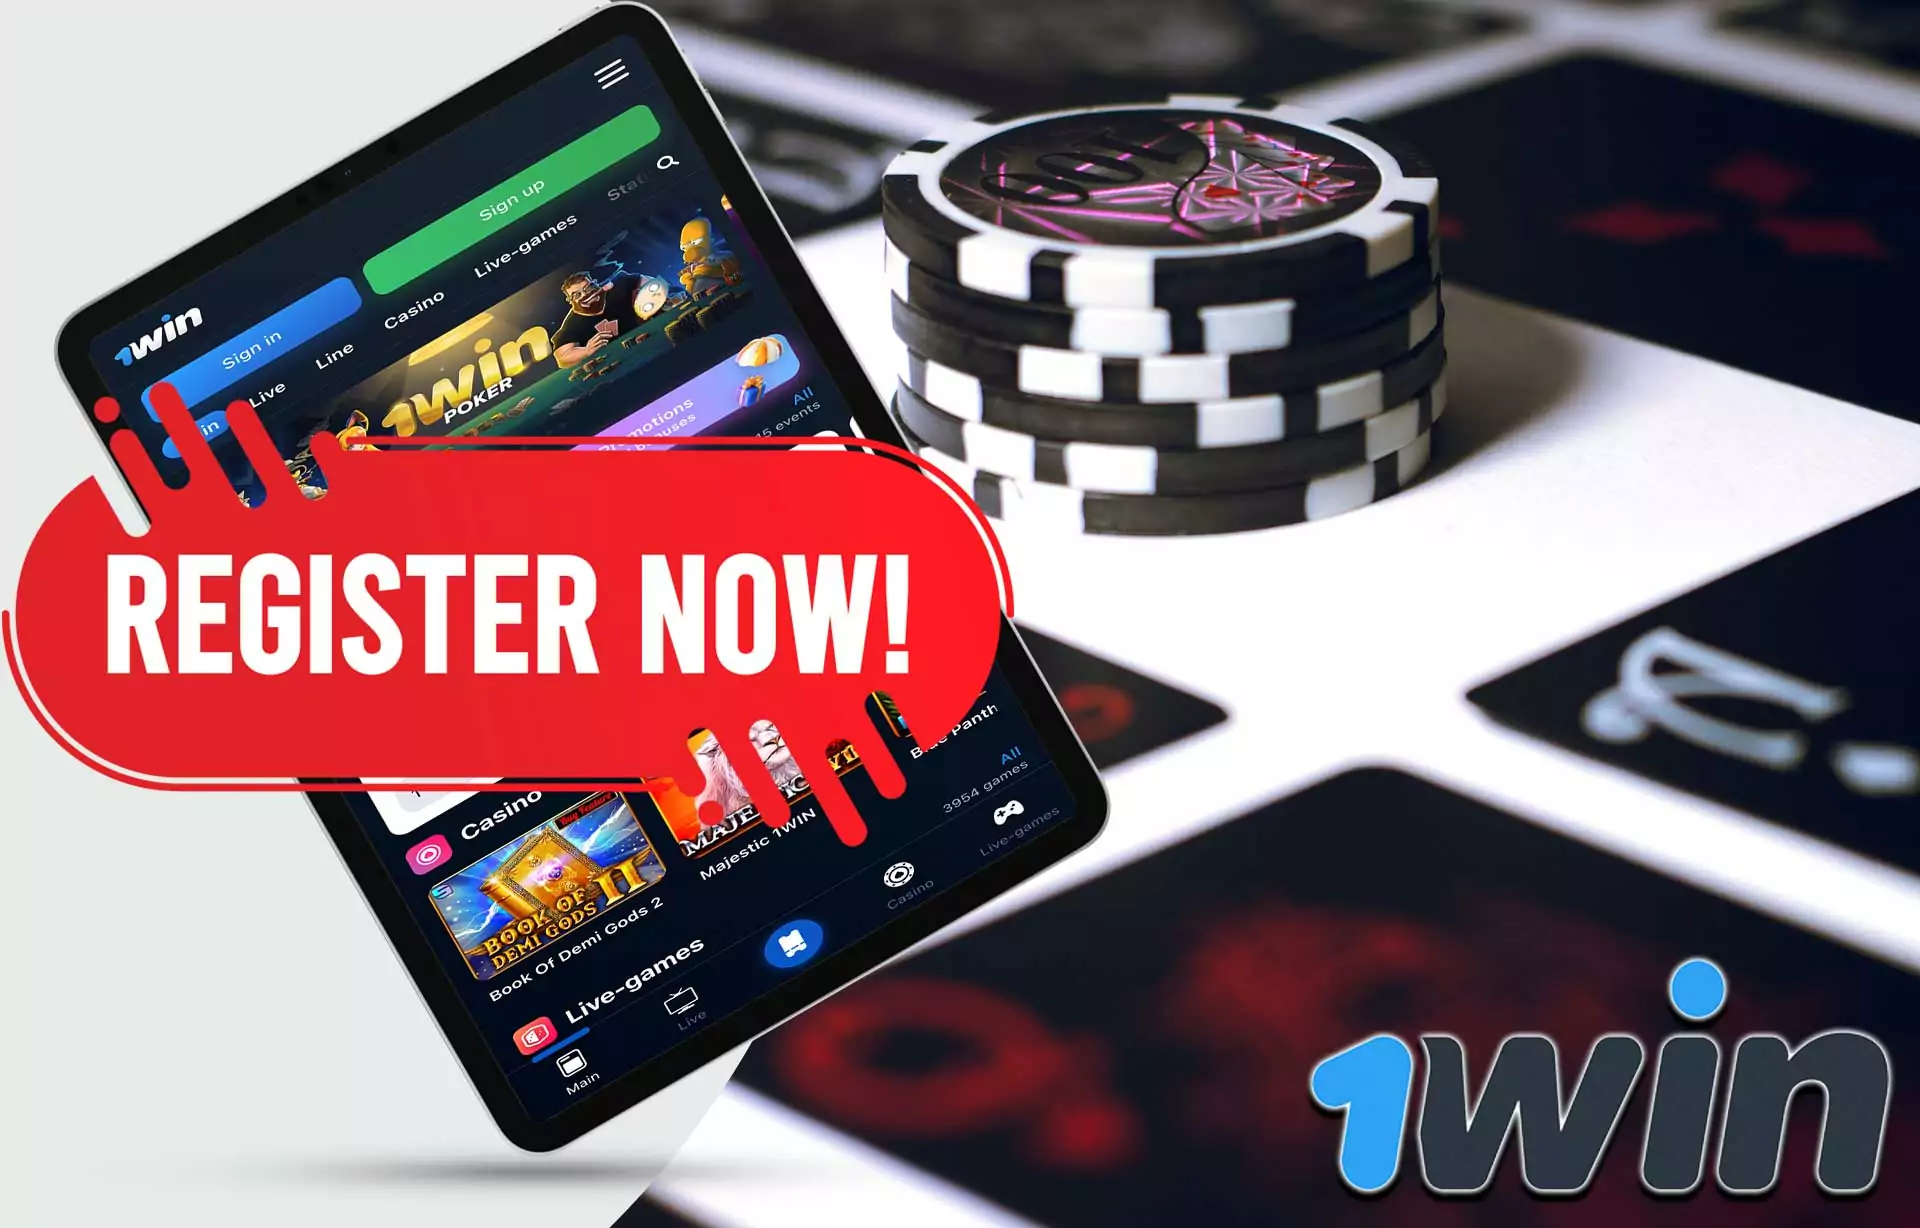 Simple interface 1Win allows you to quickly register, have a good time playing in the casino.